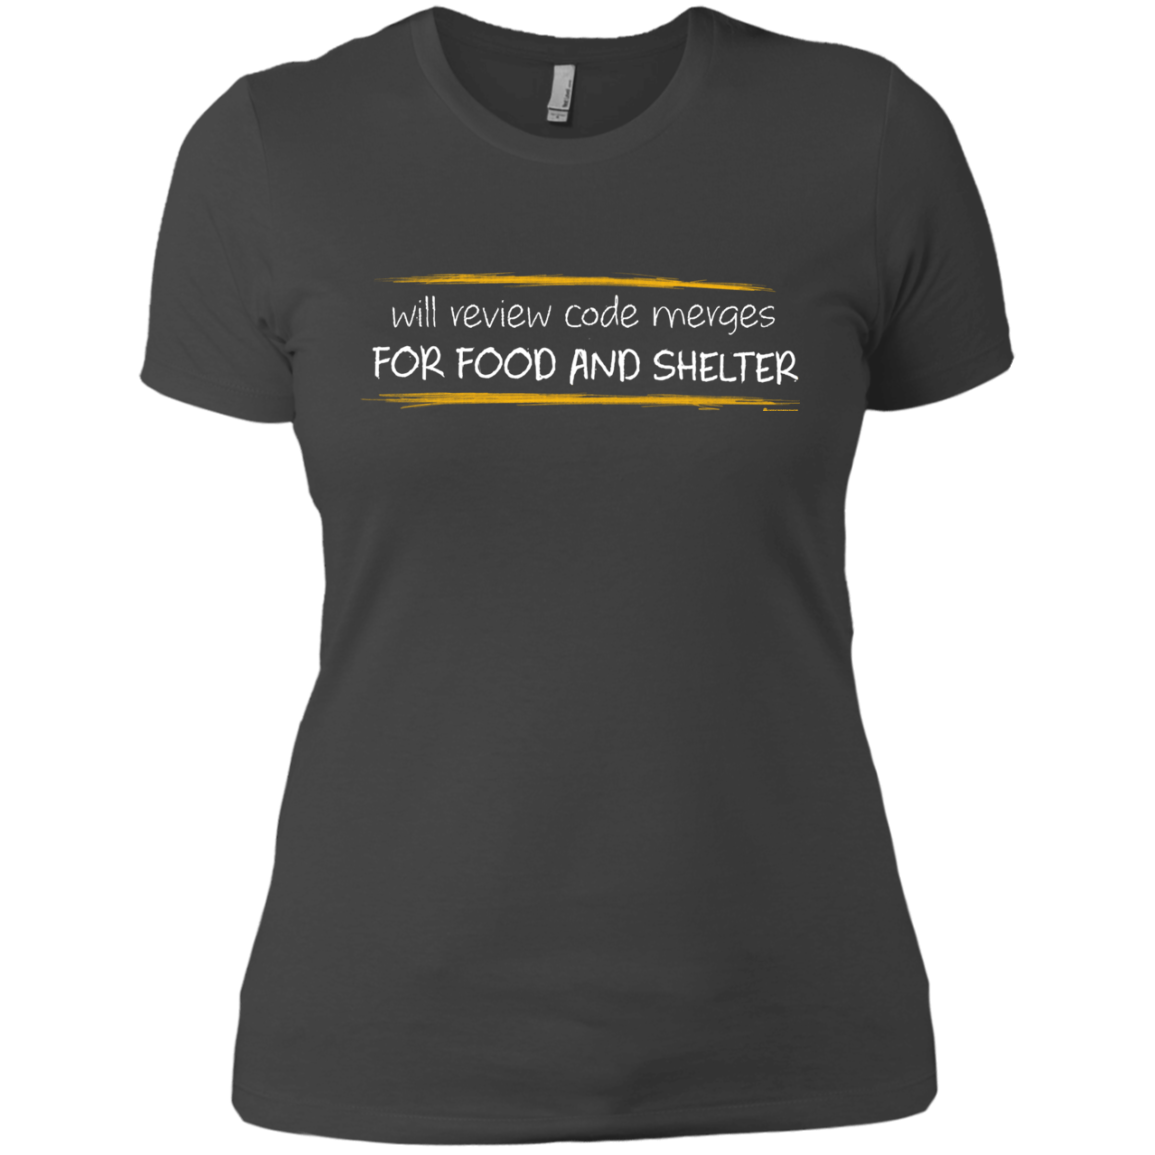 Reviewing Code For Food And Shelter Women's Premium T-Shirt